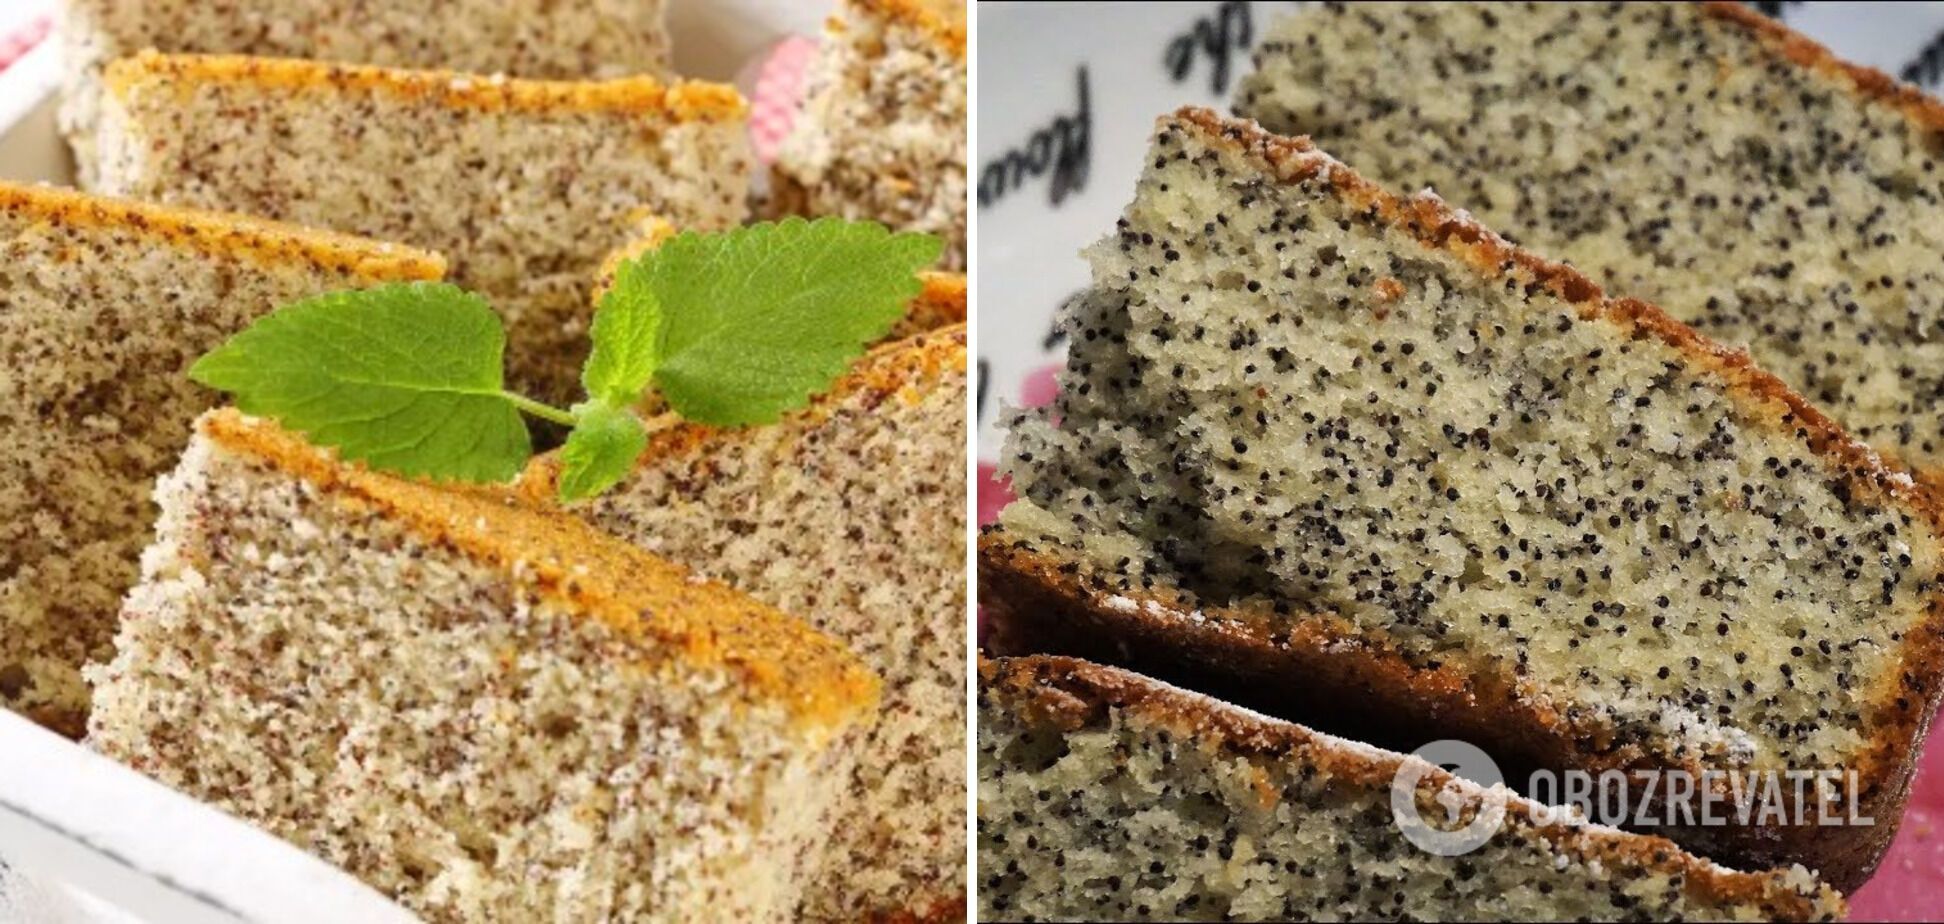 Poppy seed cake without yeast and baking